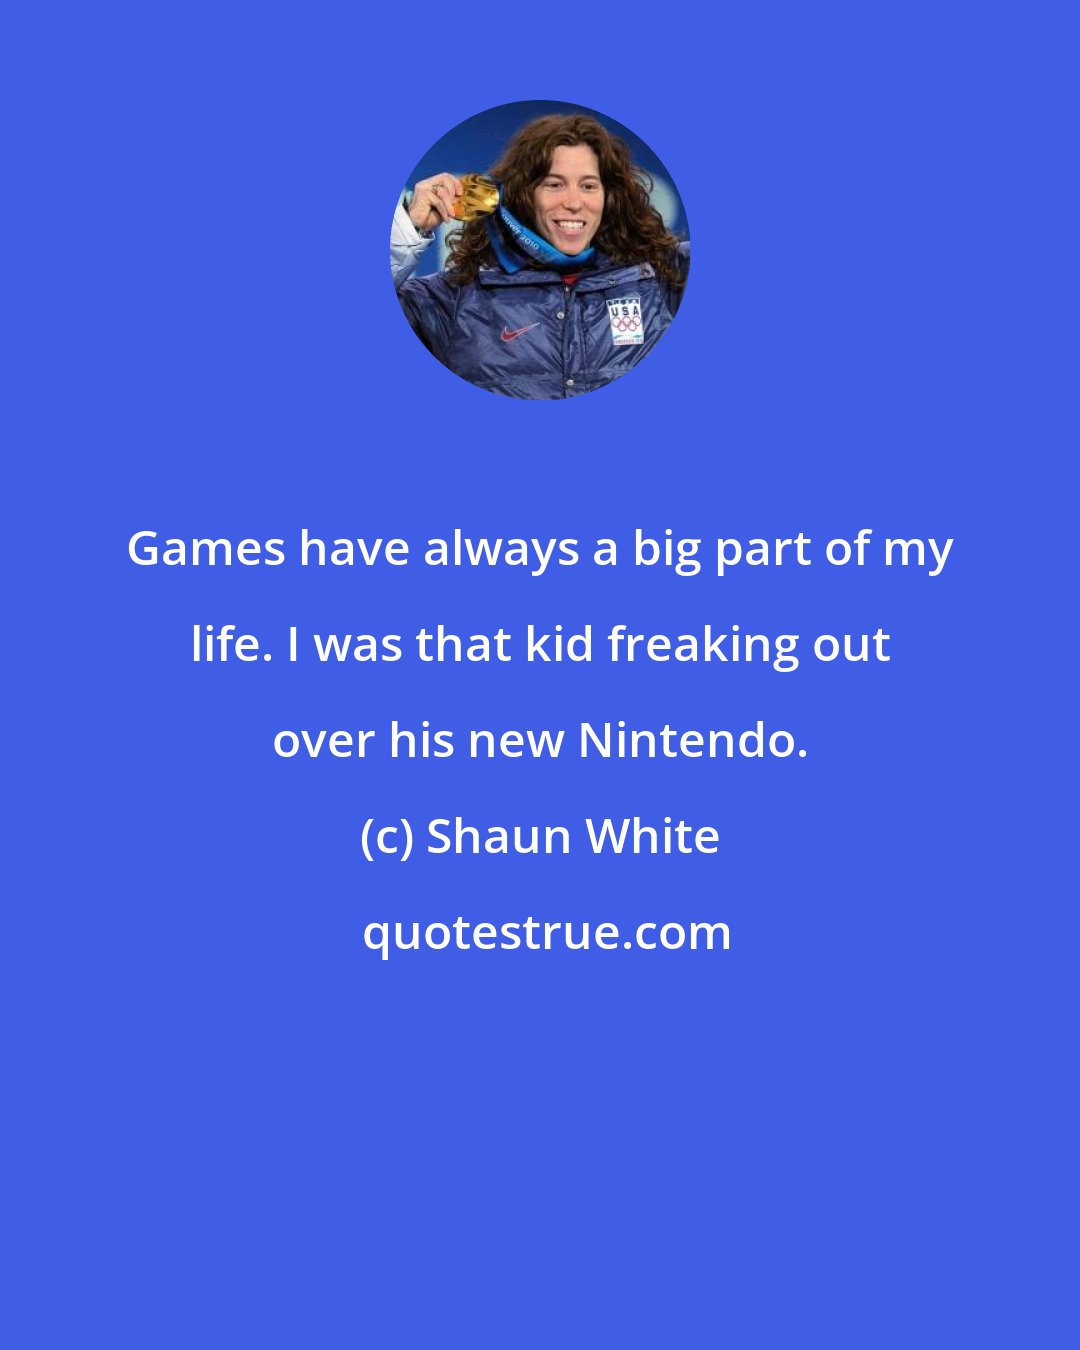 Shaun White: Games have always a big part of my life. I was that kid freaking out over his new Nintendo.